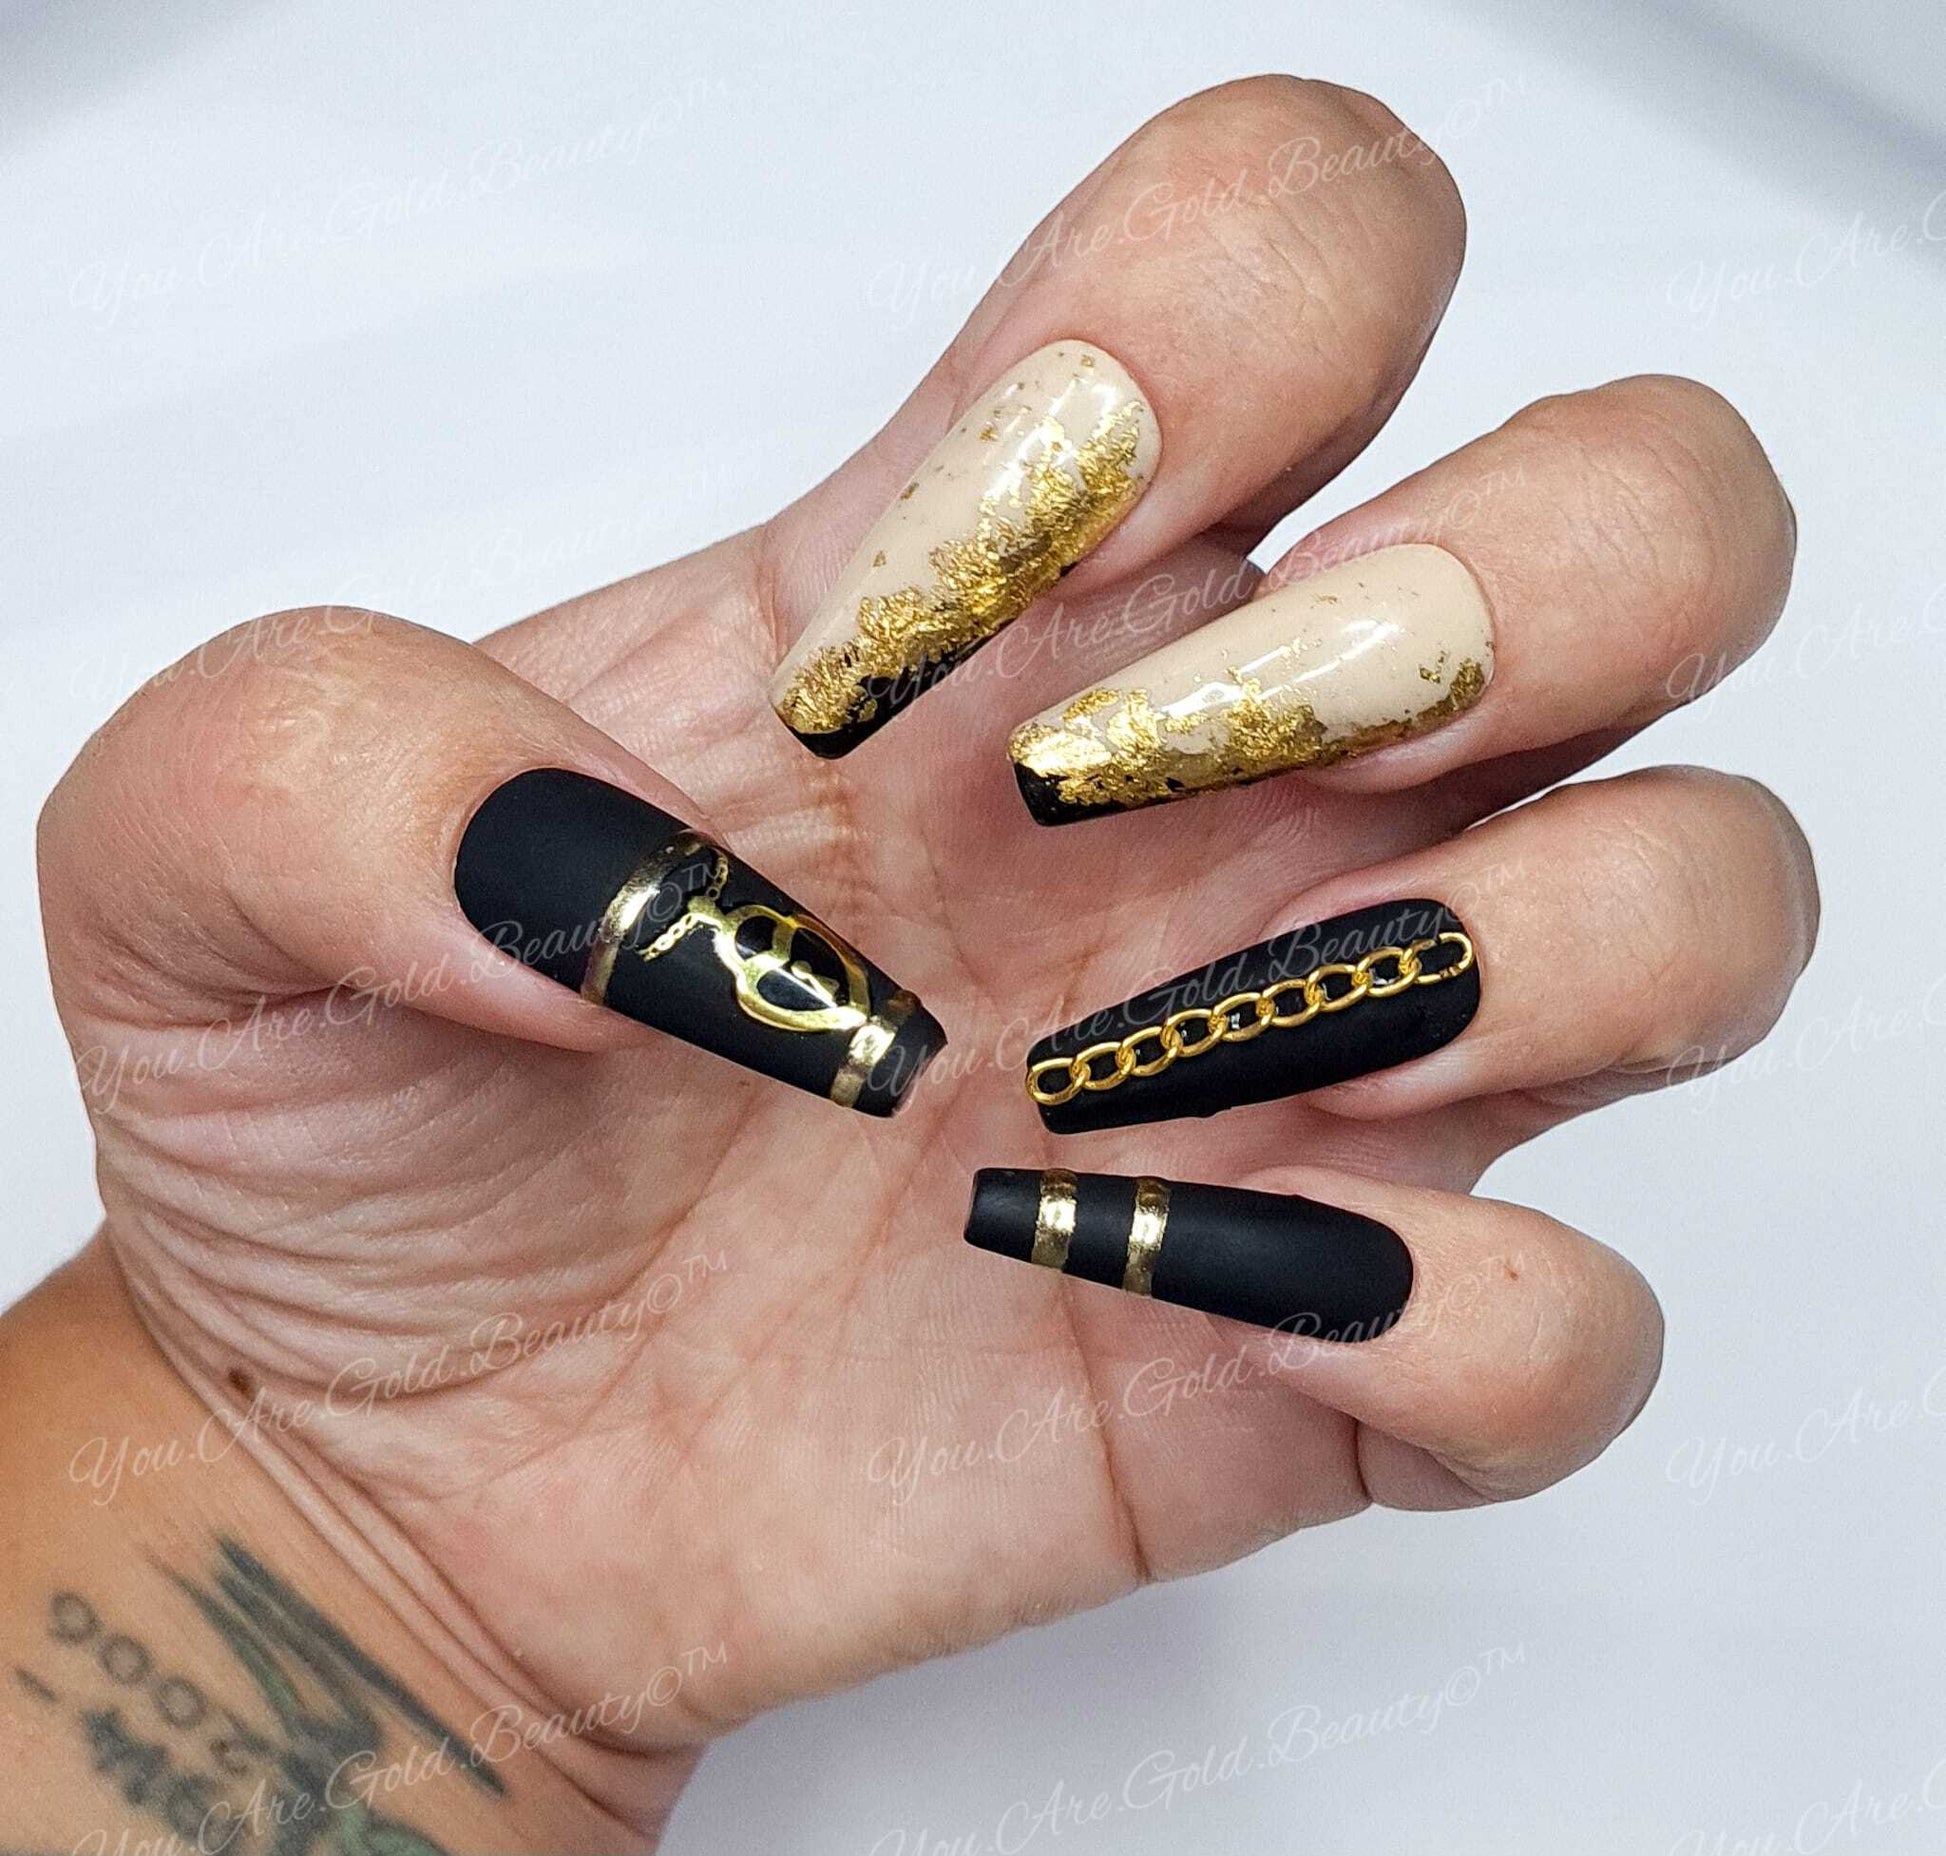 black and gold coffin shaped nails gold leaf nail designs press on nails uk, gold and black nails, coffin nails, coffin shaped nails, press on nails uk, matte black nails, gold nail designs, 